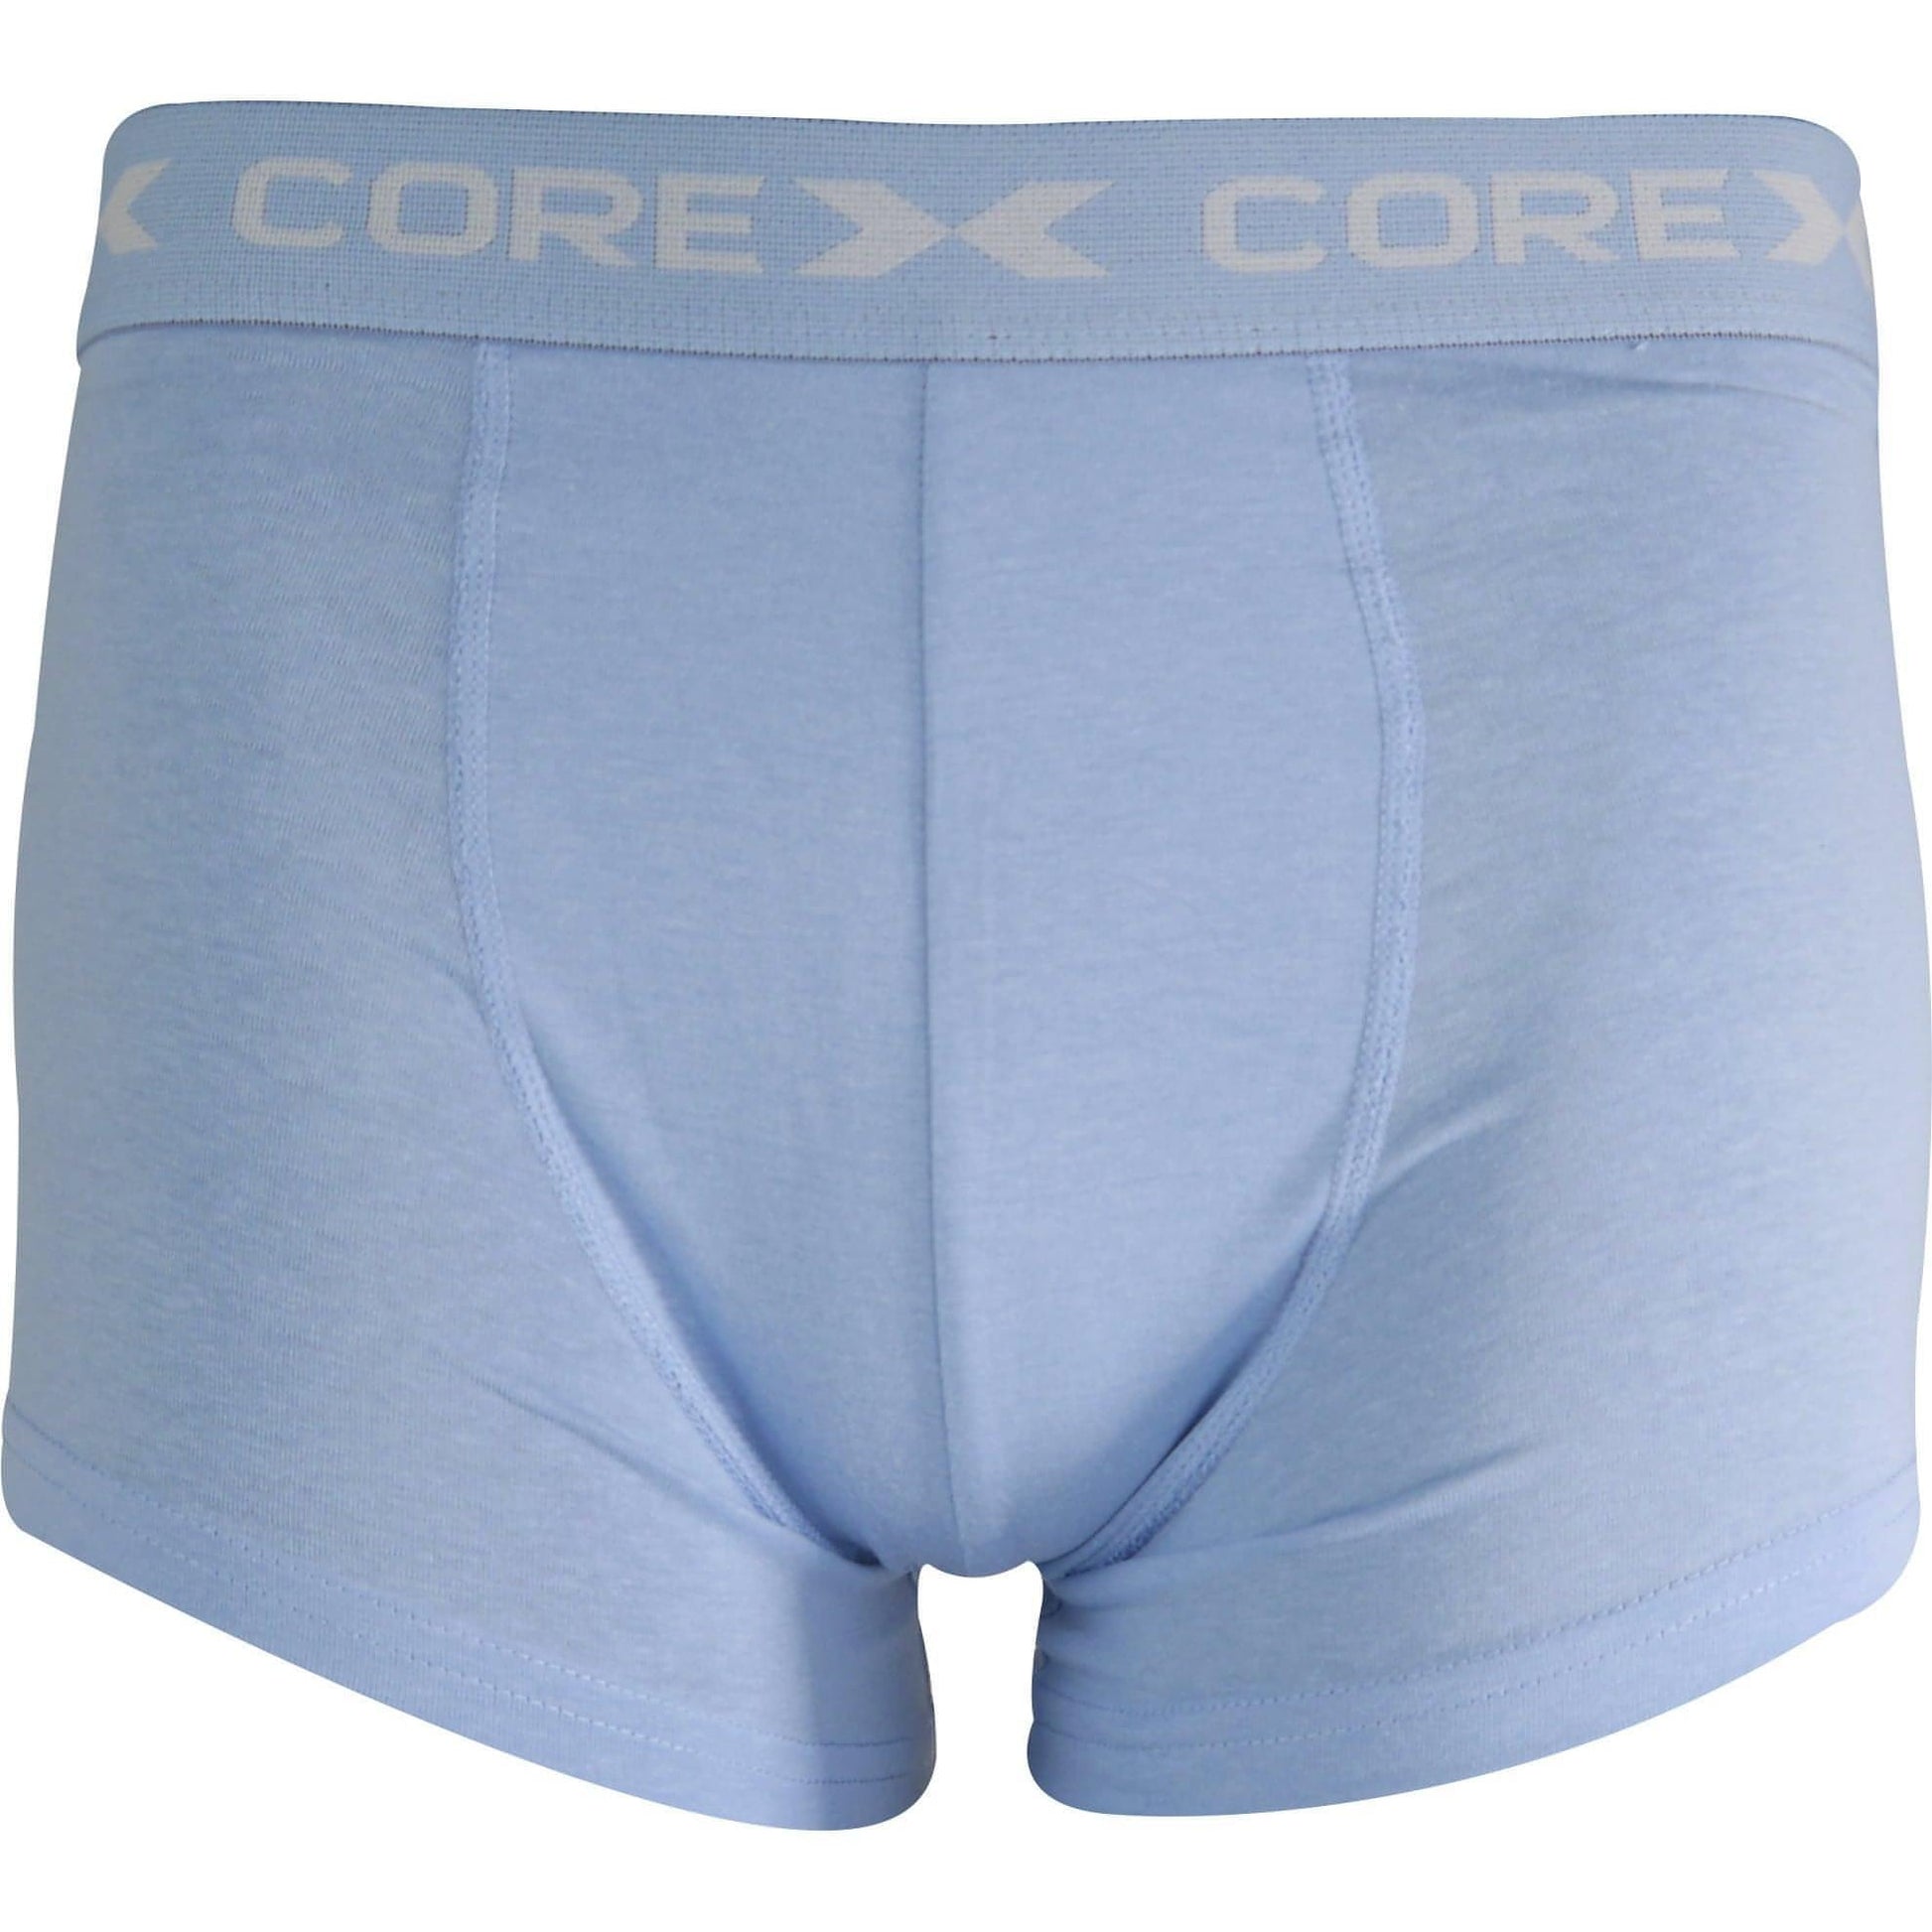 Corex Fitness Classic Pack Boxers 1P204931Wm Navyblue Blue Front - Front View